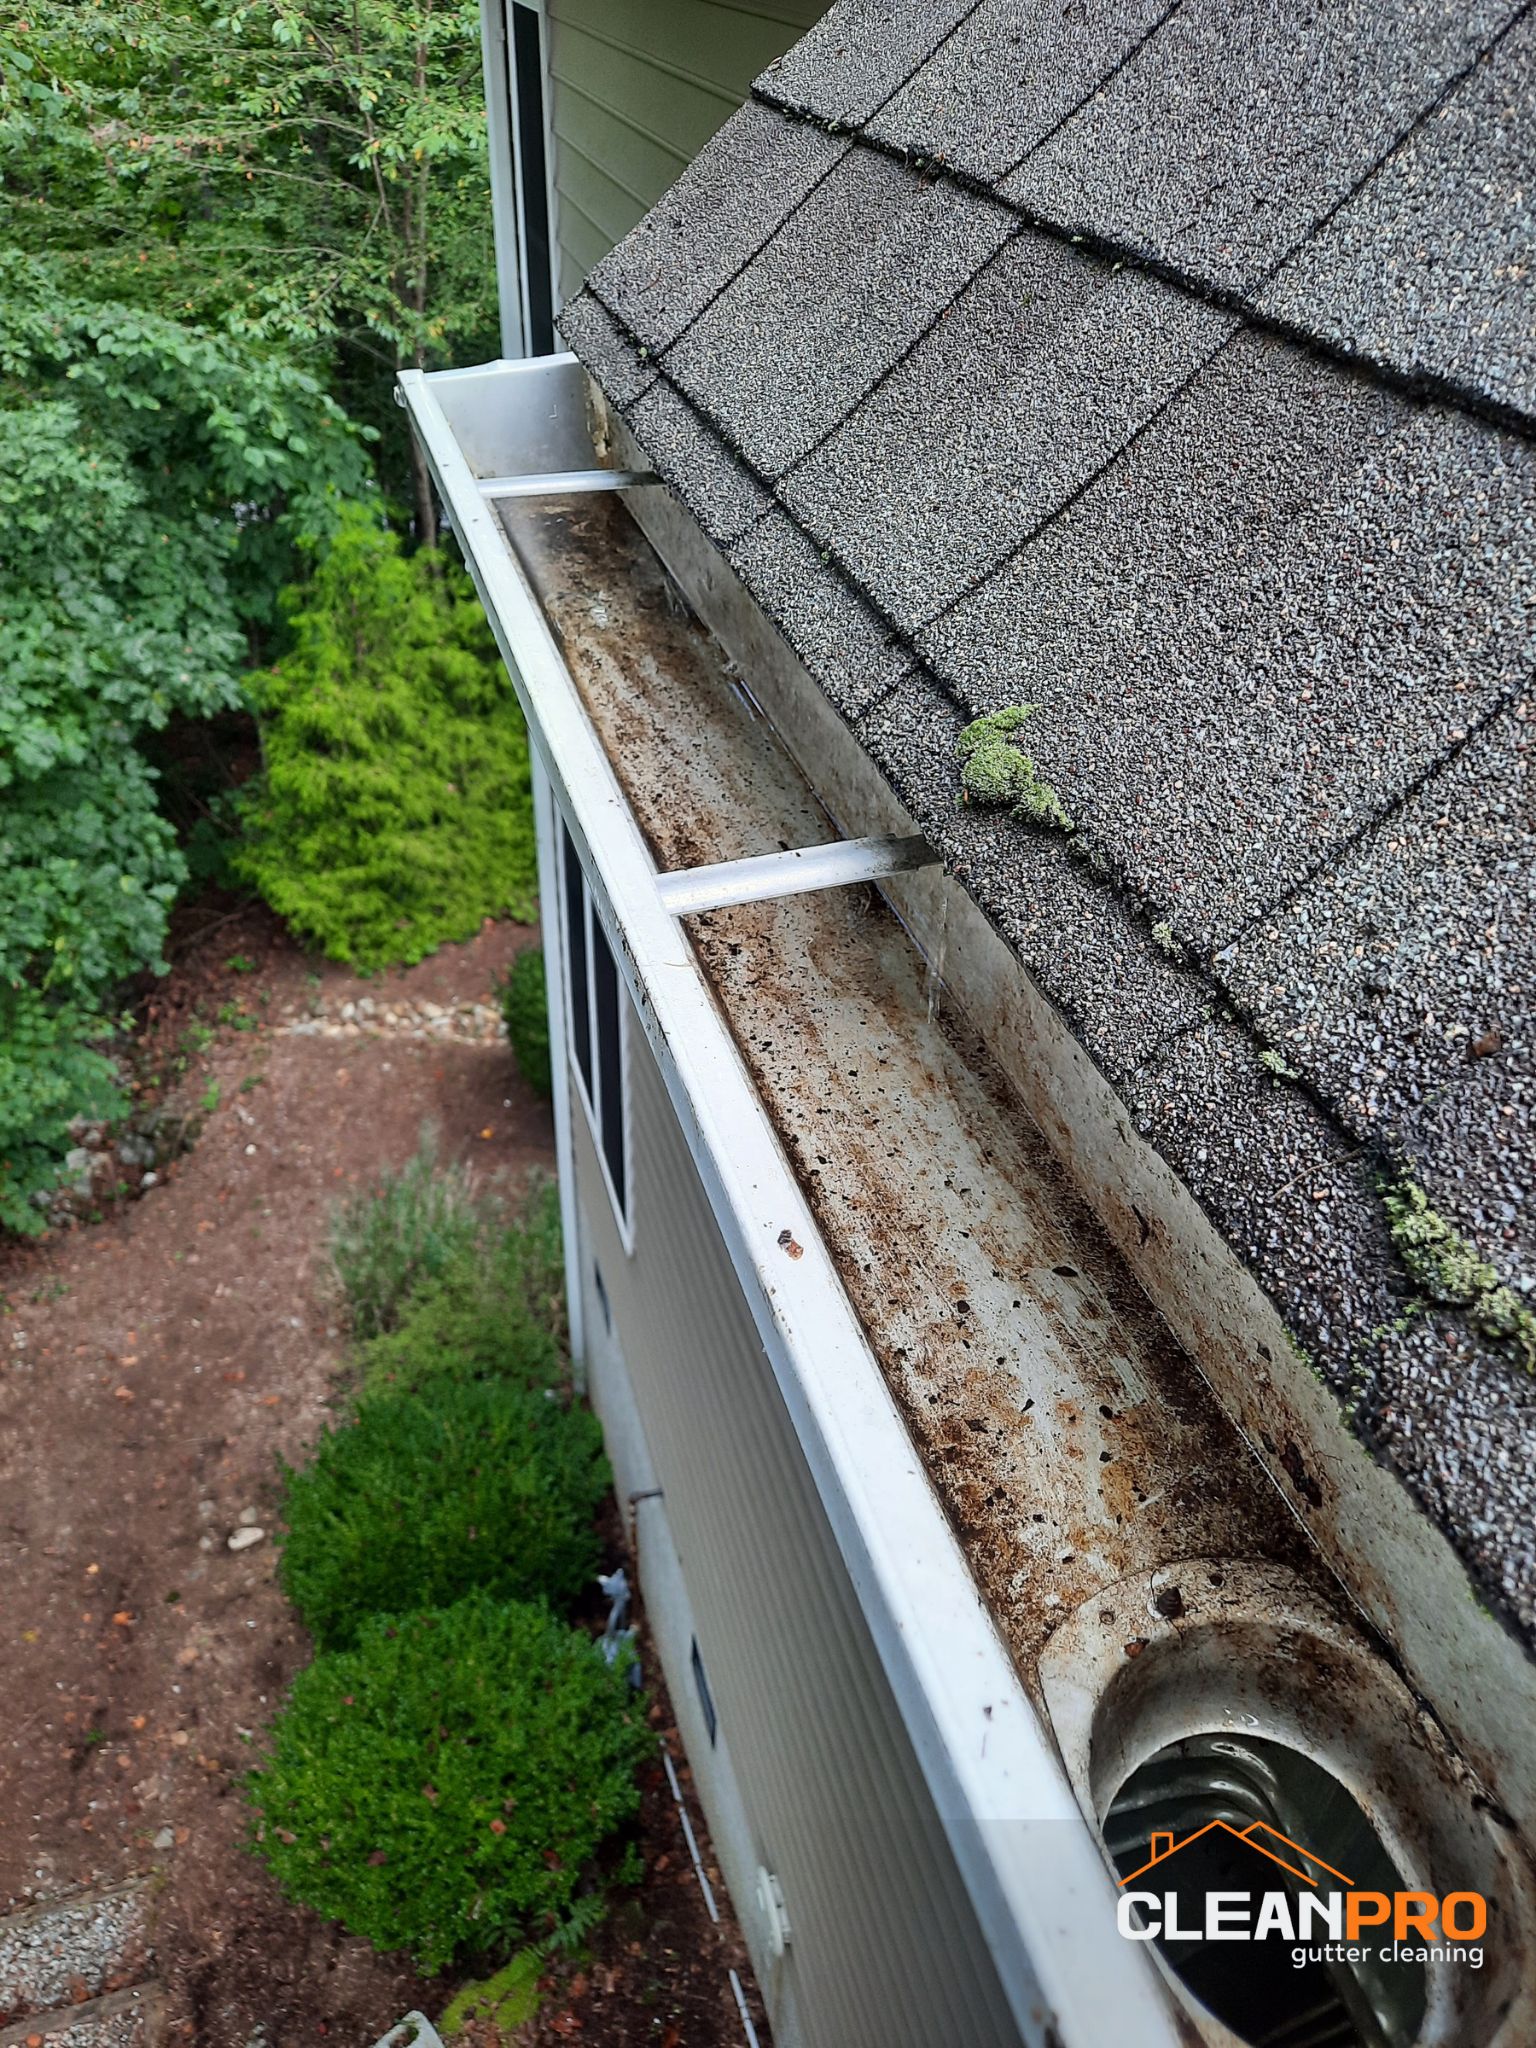 Top Notch Gutter Cleaning Service in Greenville